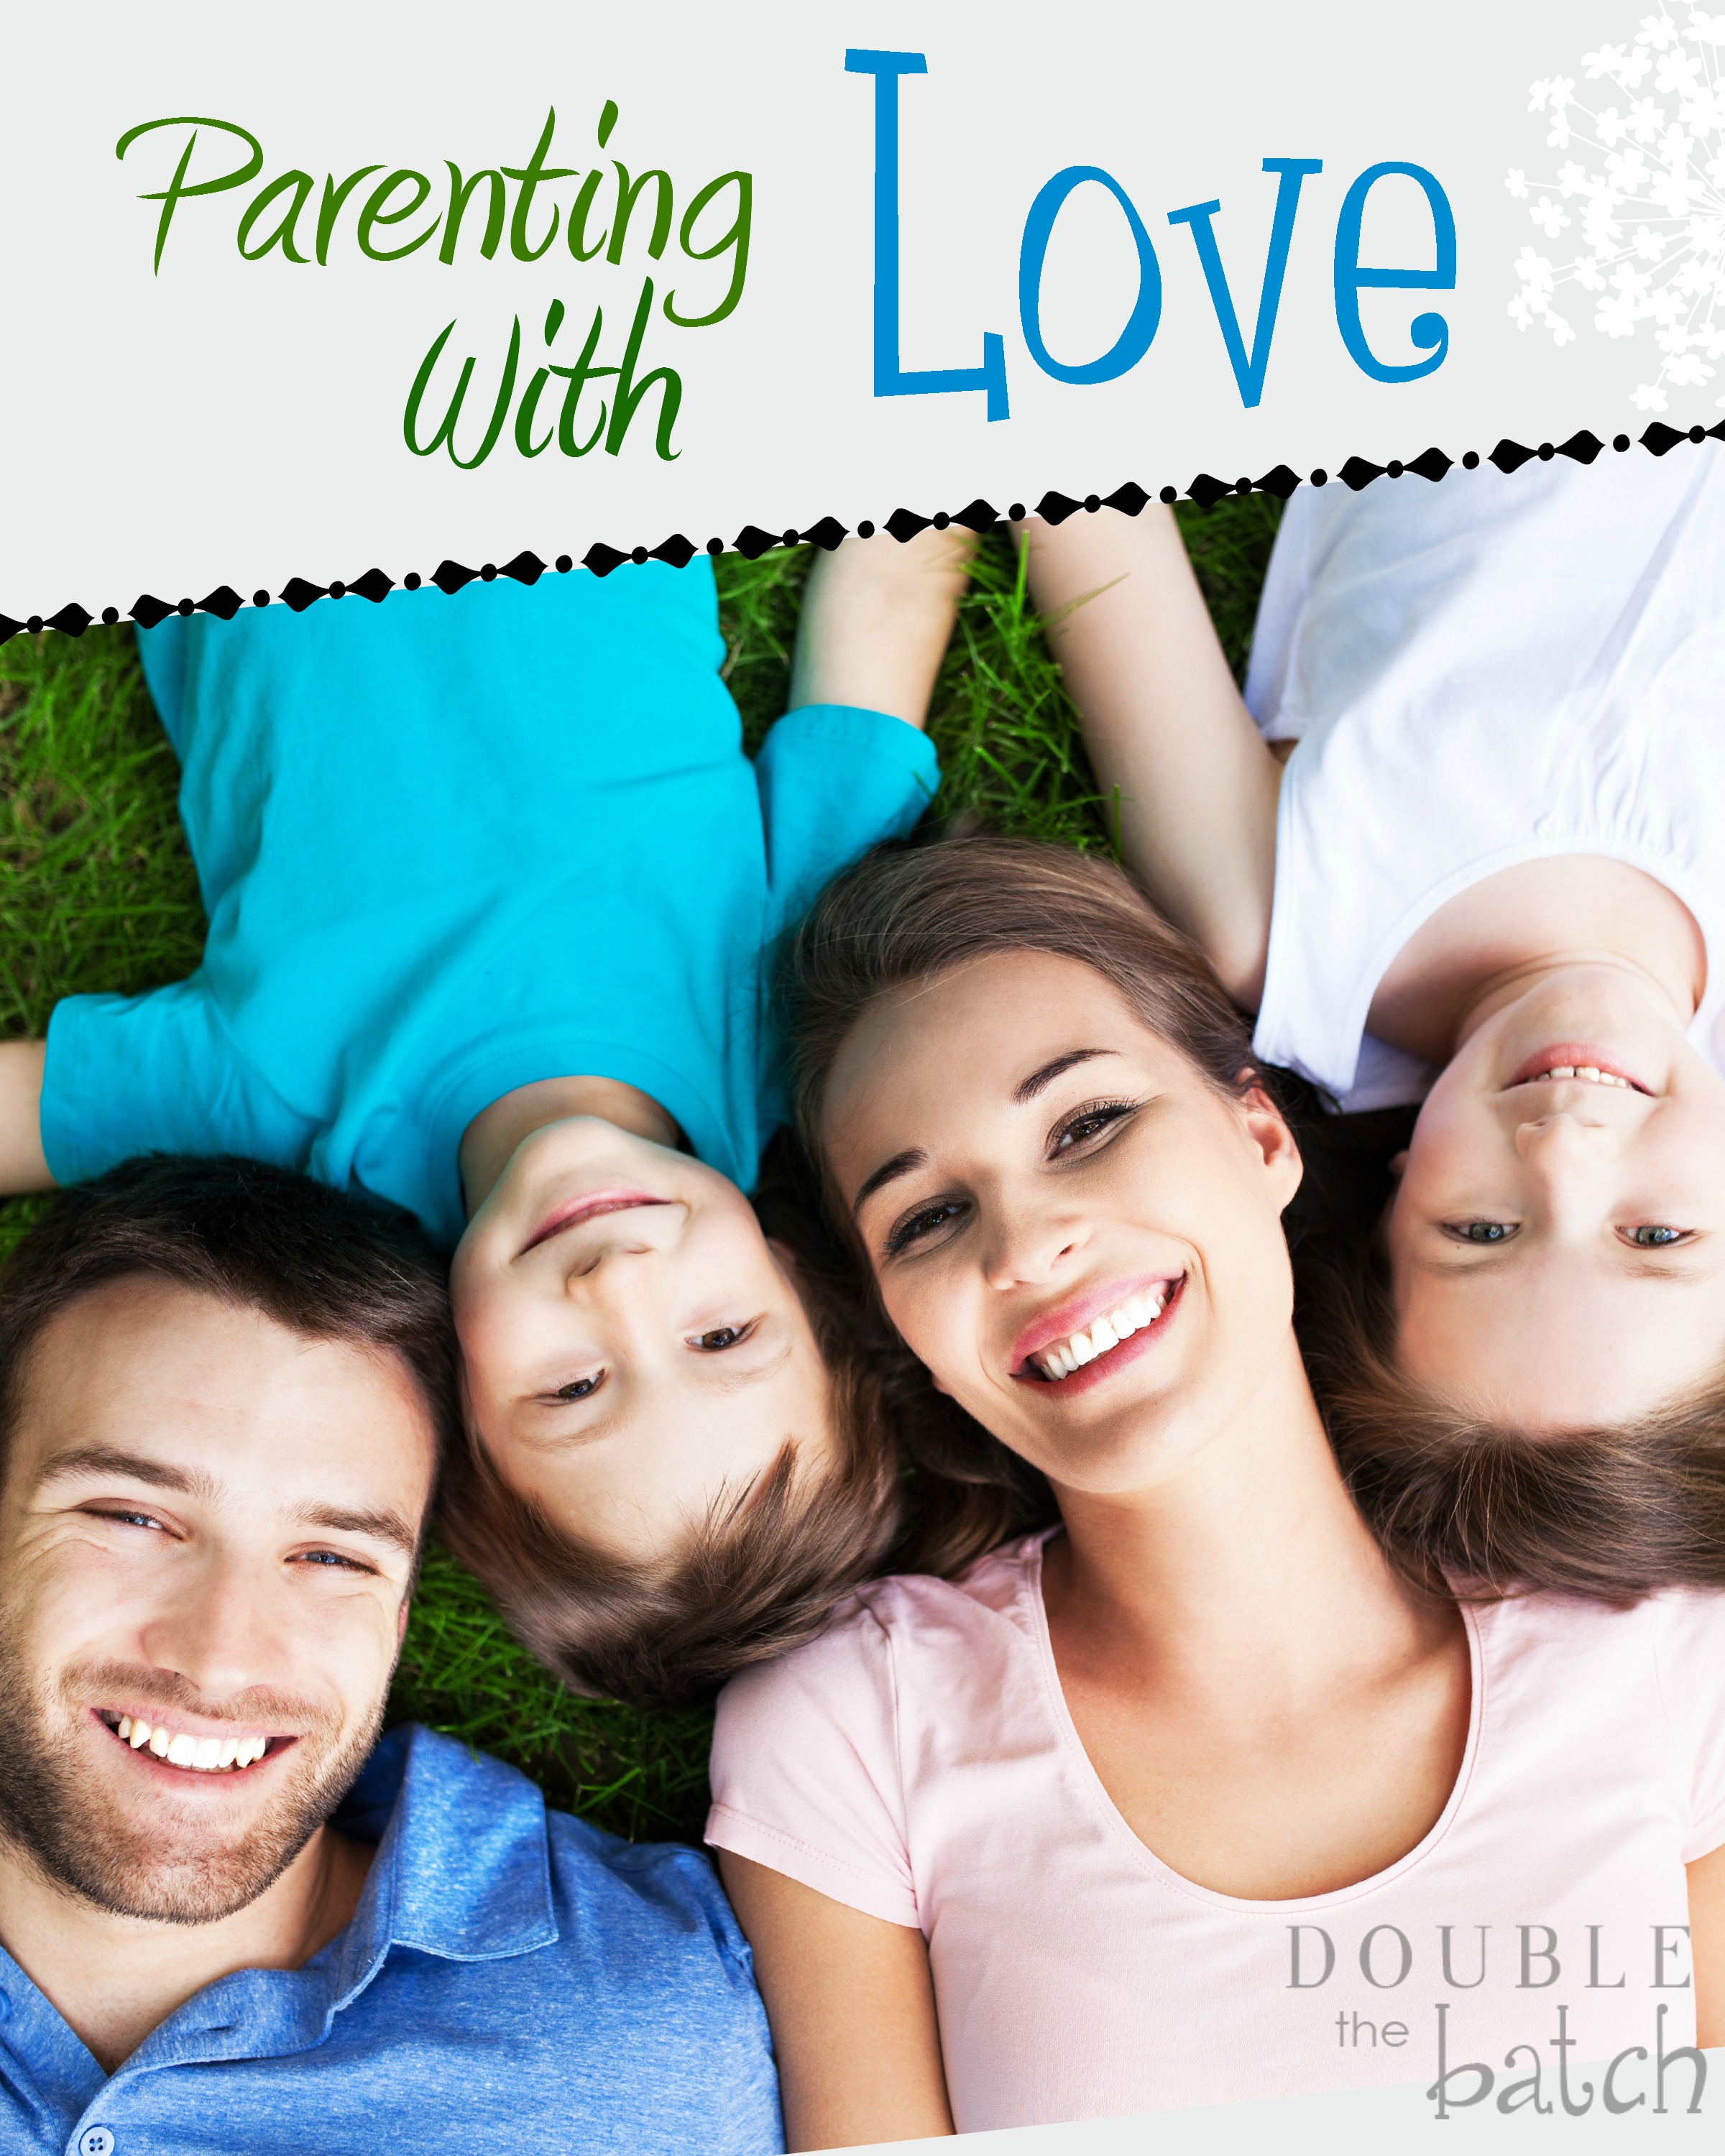 How to be more successful in my parenting by implementing unconditional LOVE.